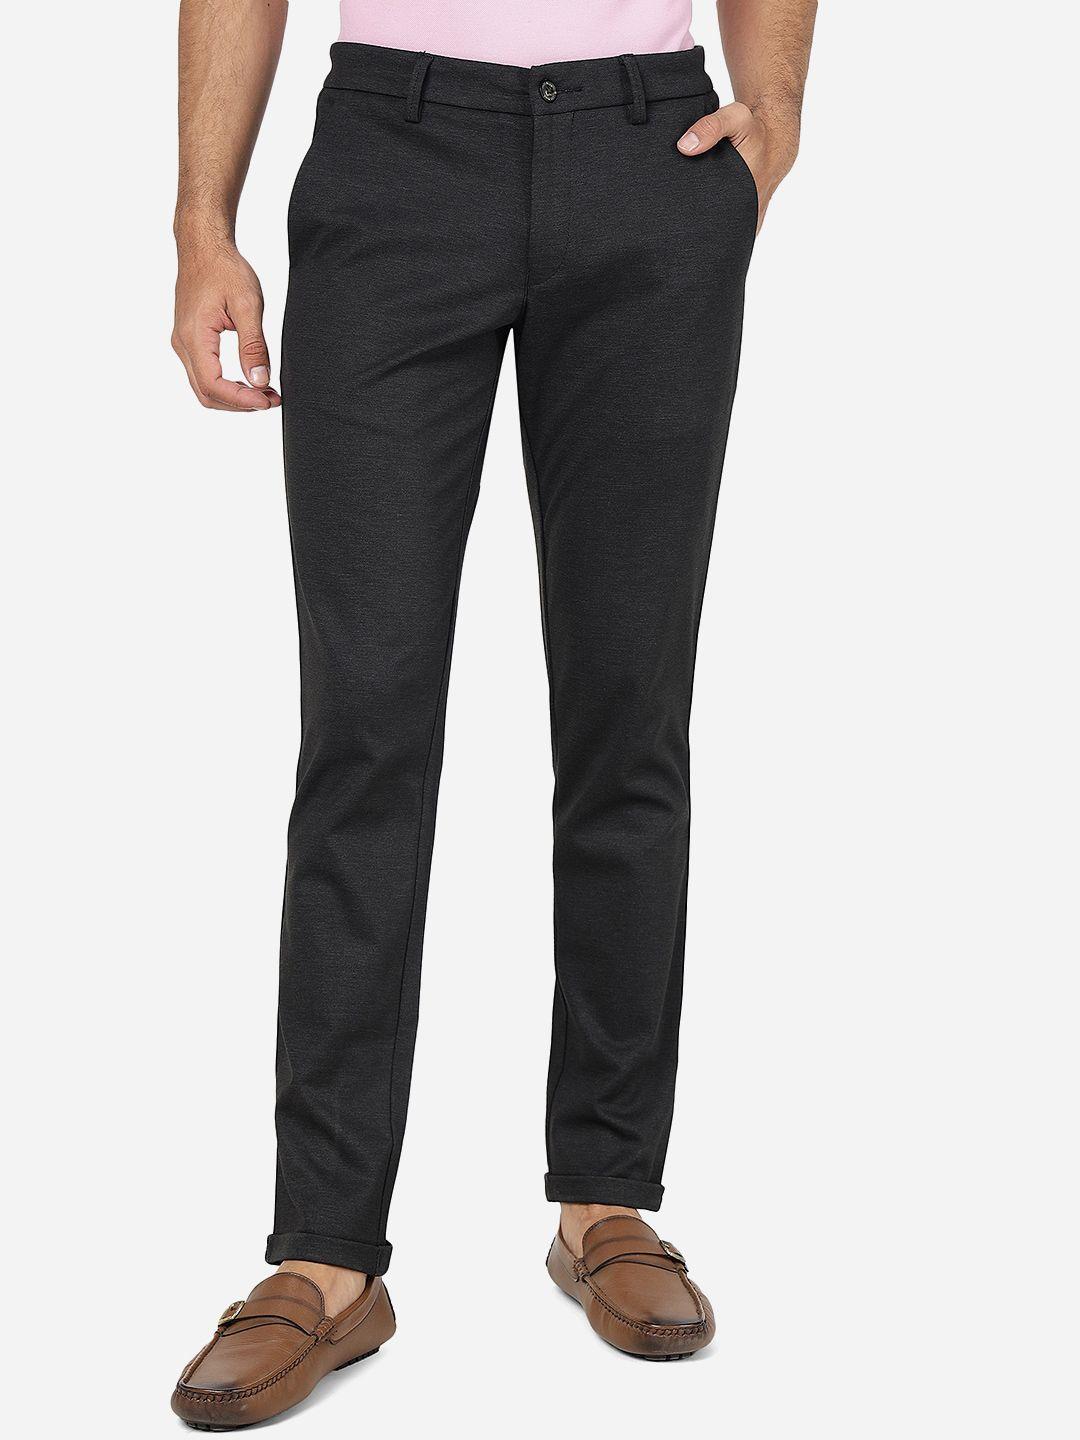 jade-blue-men-mid-rise-pure-cotton-formal-trousers